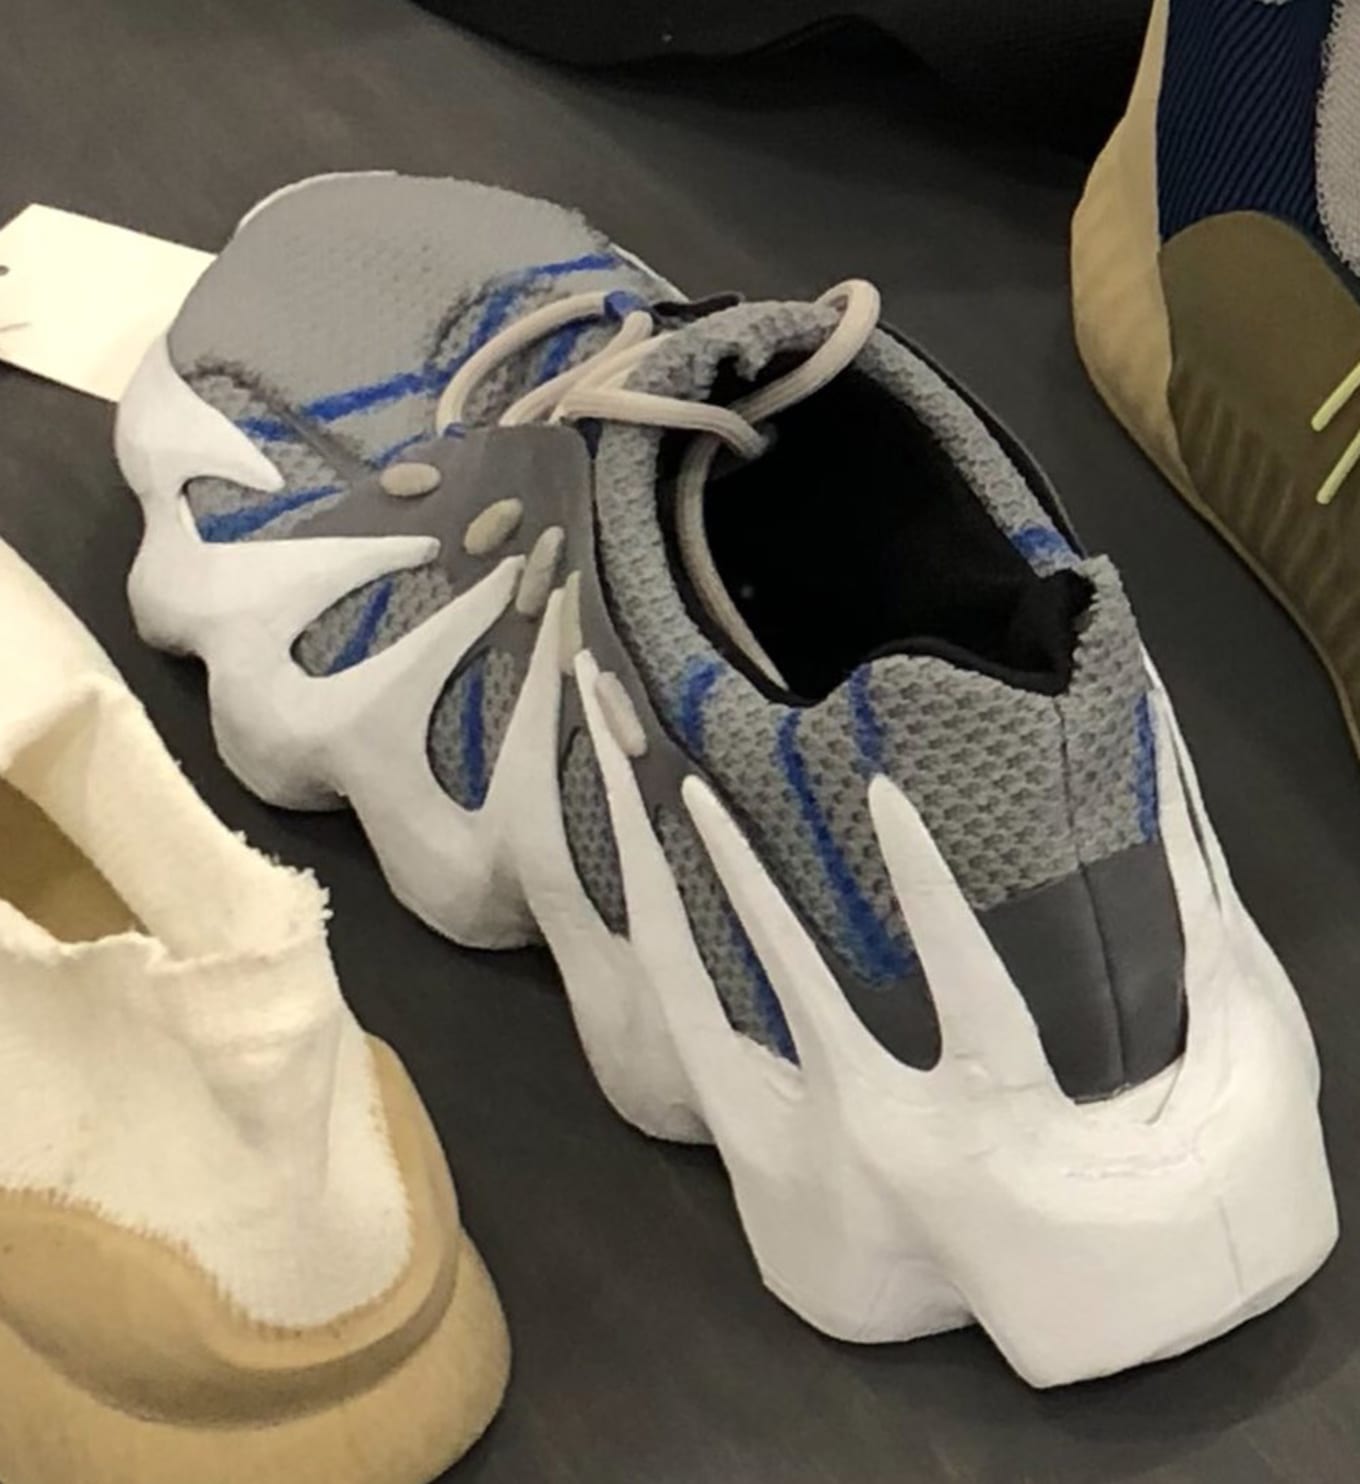 the new yeezys coming out